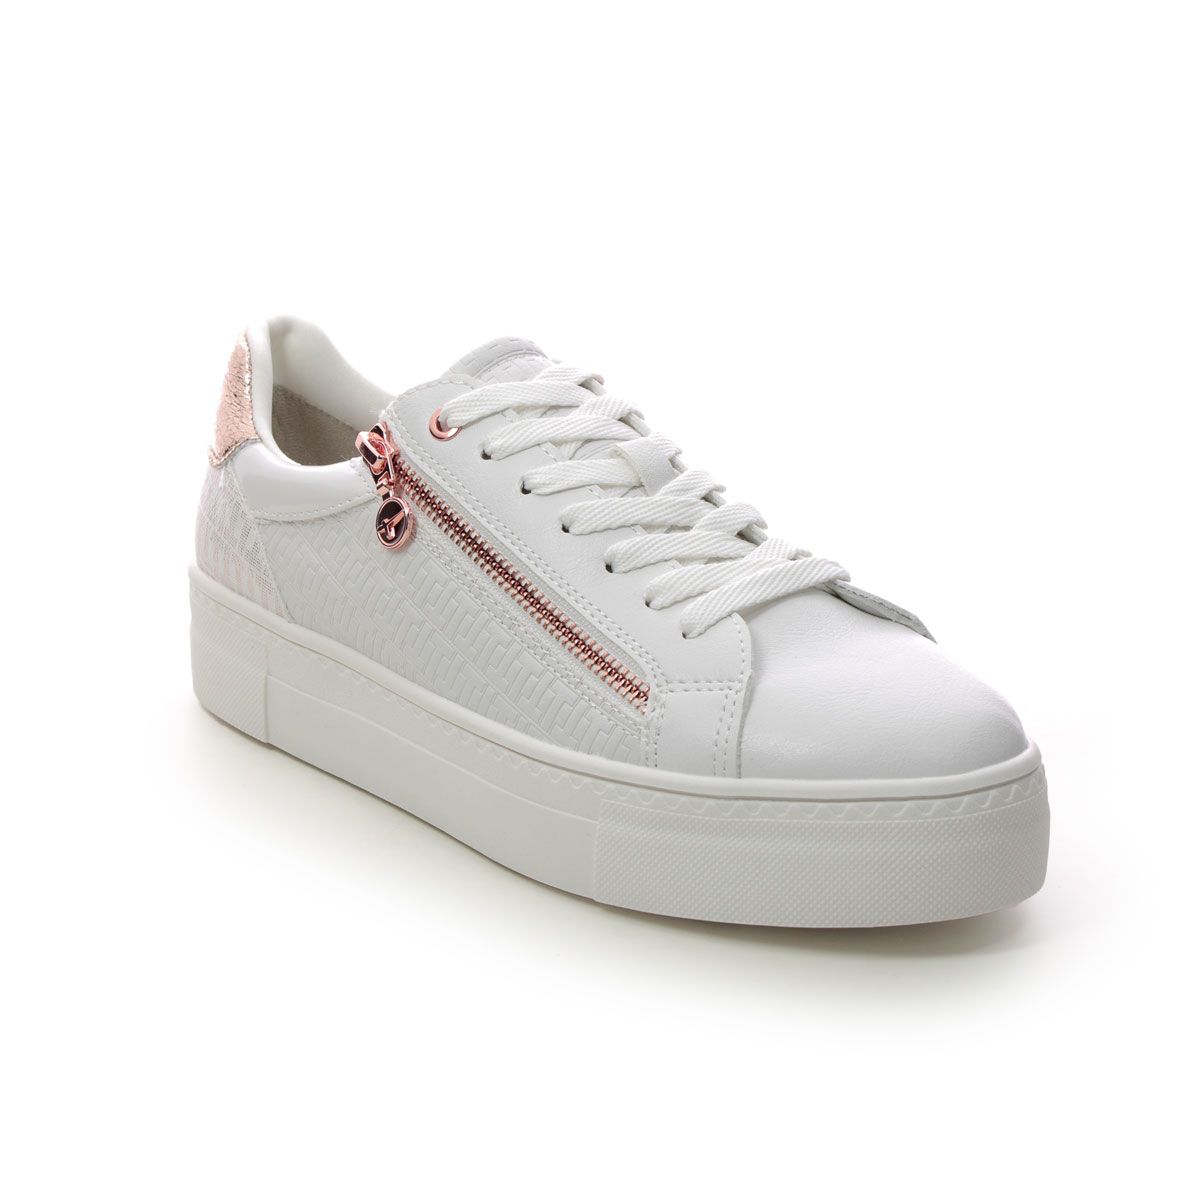 Tamaris Lima Zip White Rose Gold Womens Trainers 23313-20-196 In Size 39 In Plain White Rose Gold